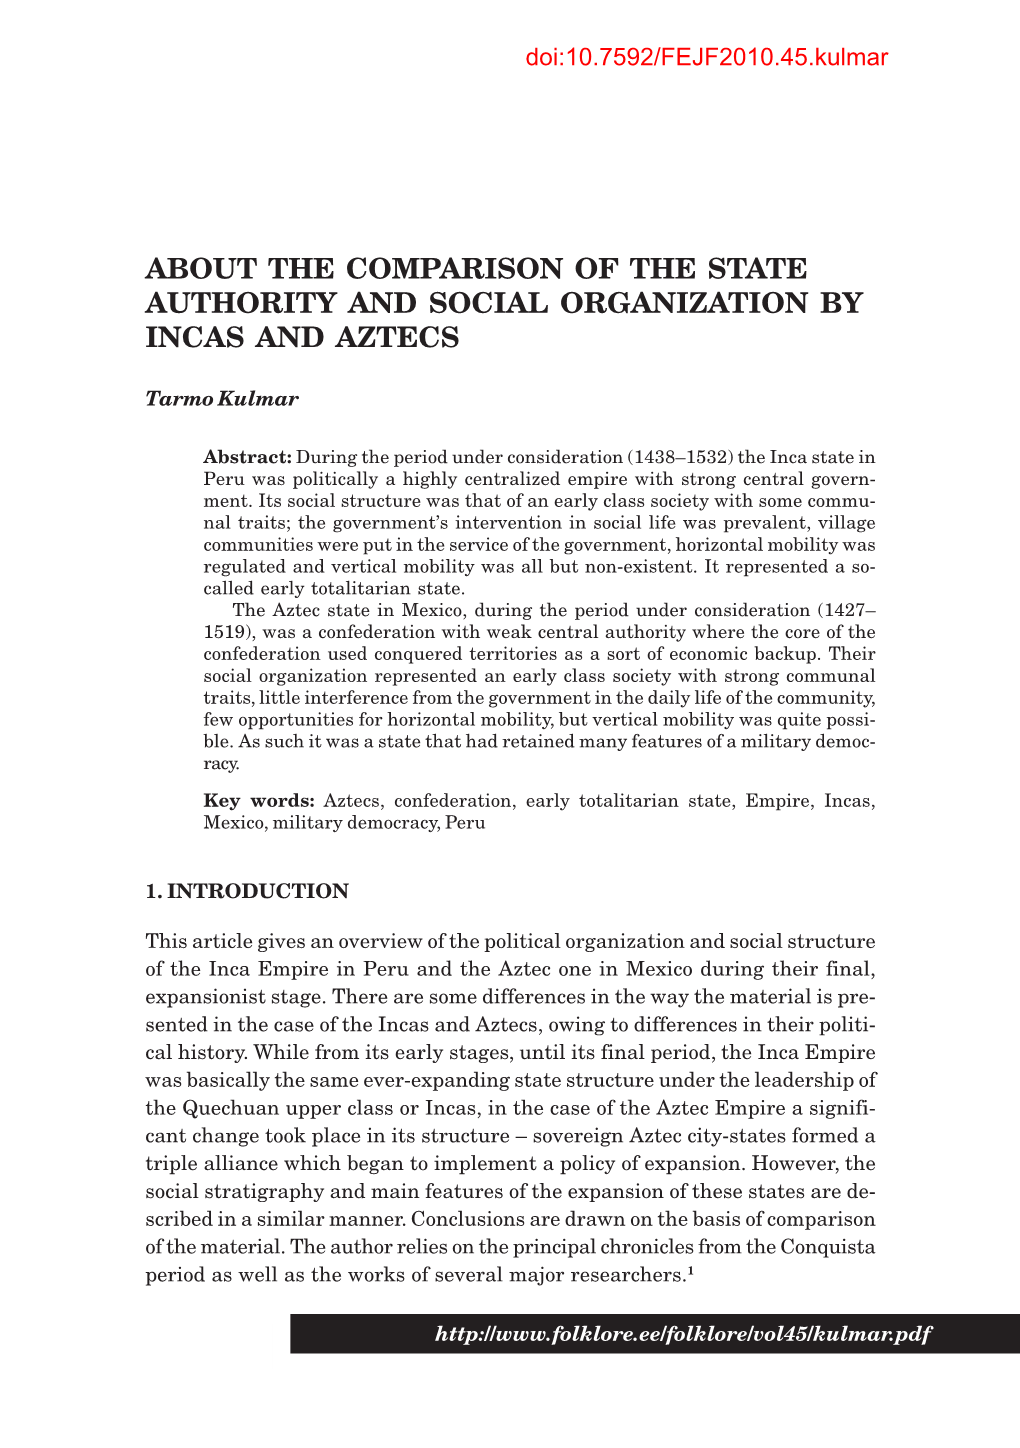 About the Comparison of the State Authority and Social Organization by Incas and Aztecs